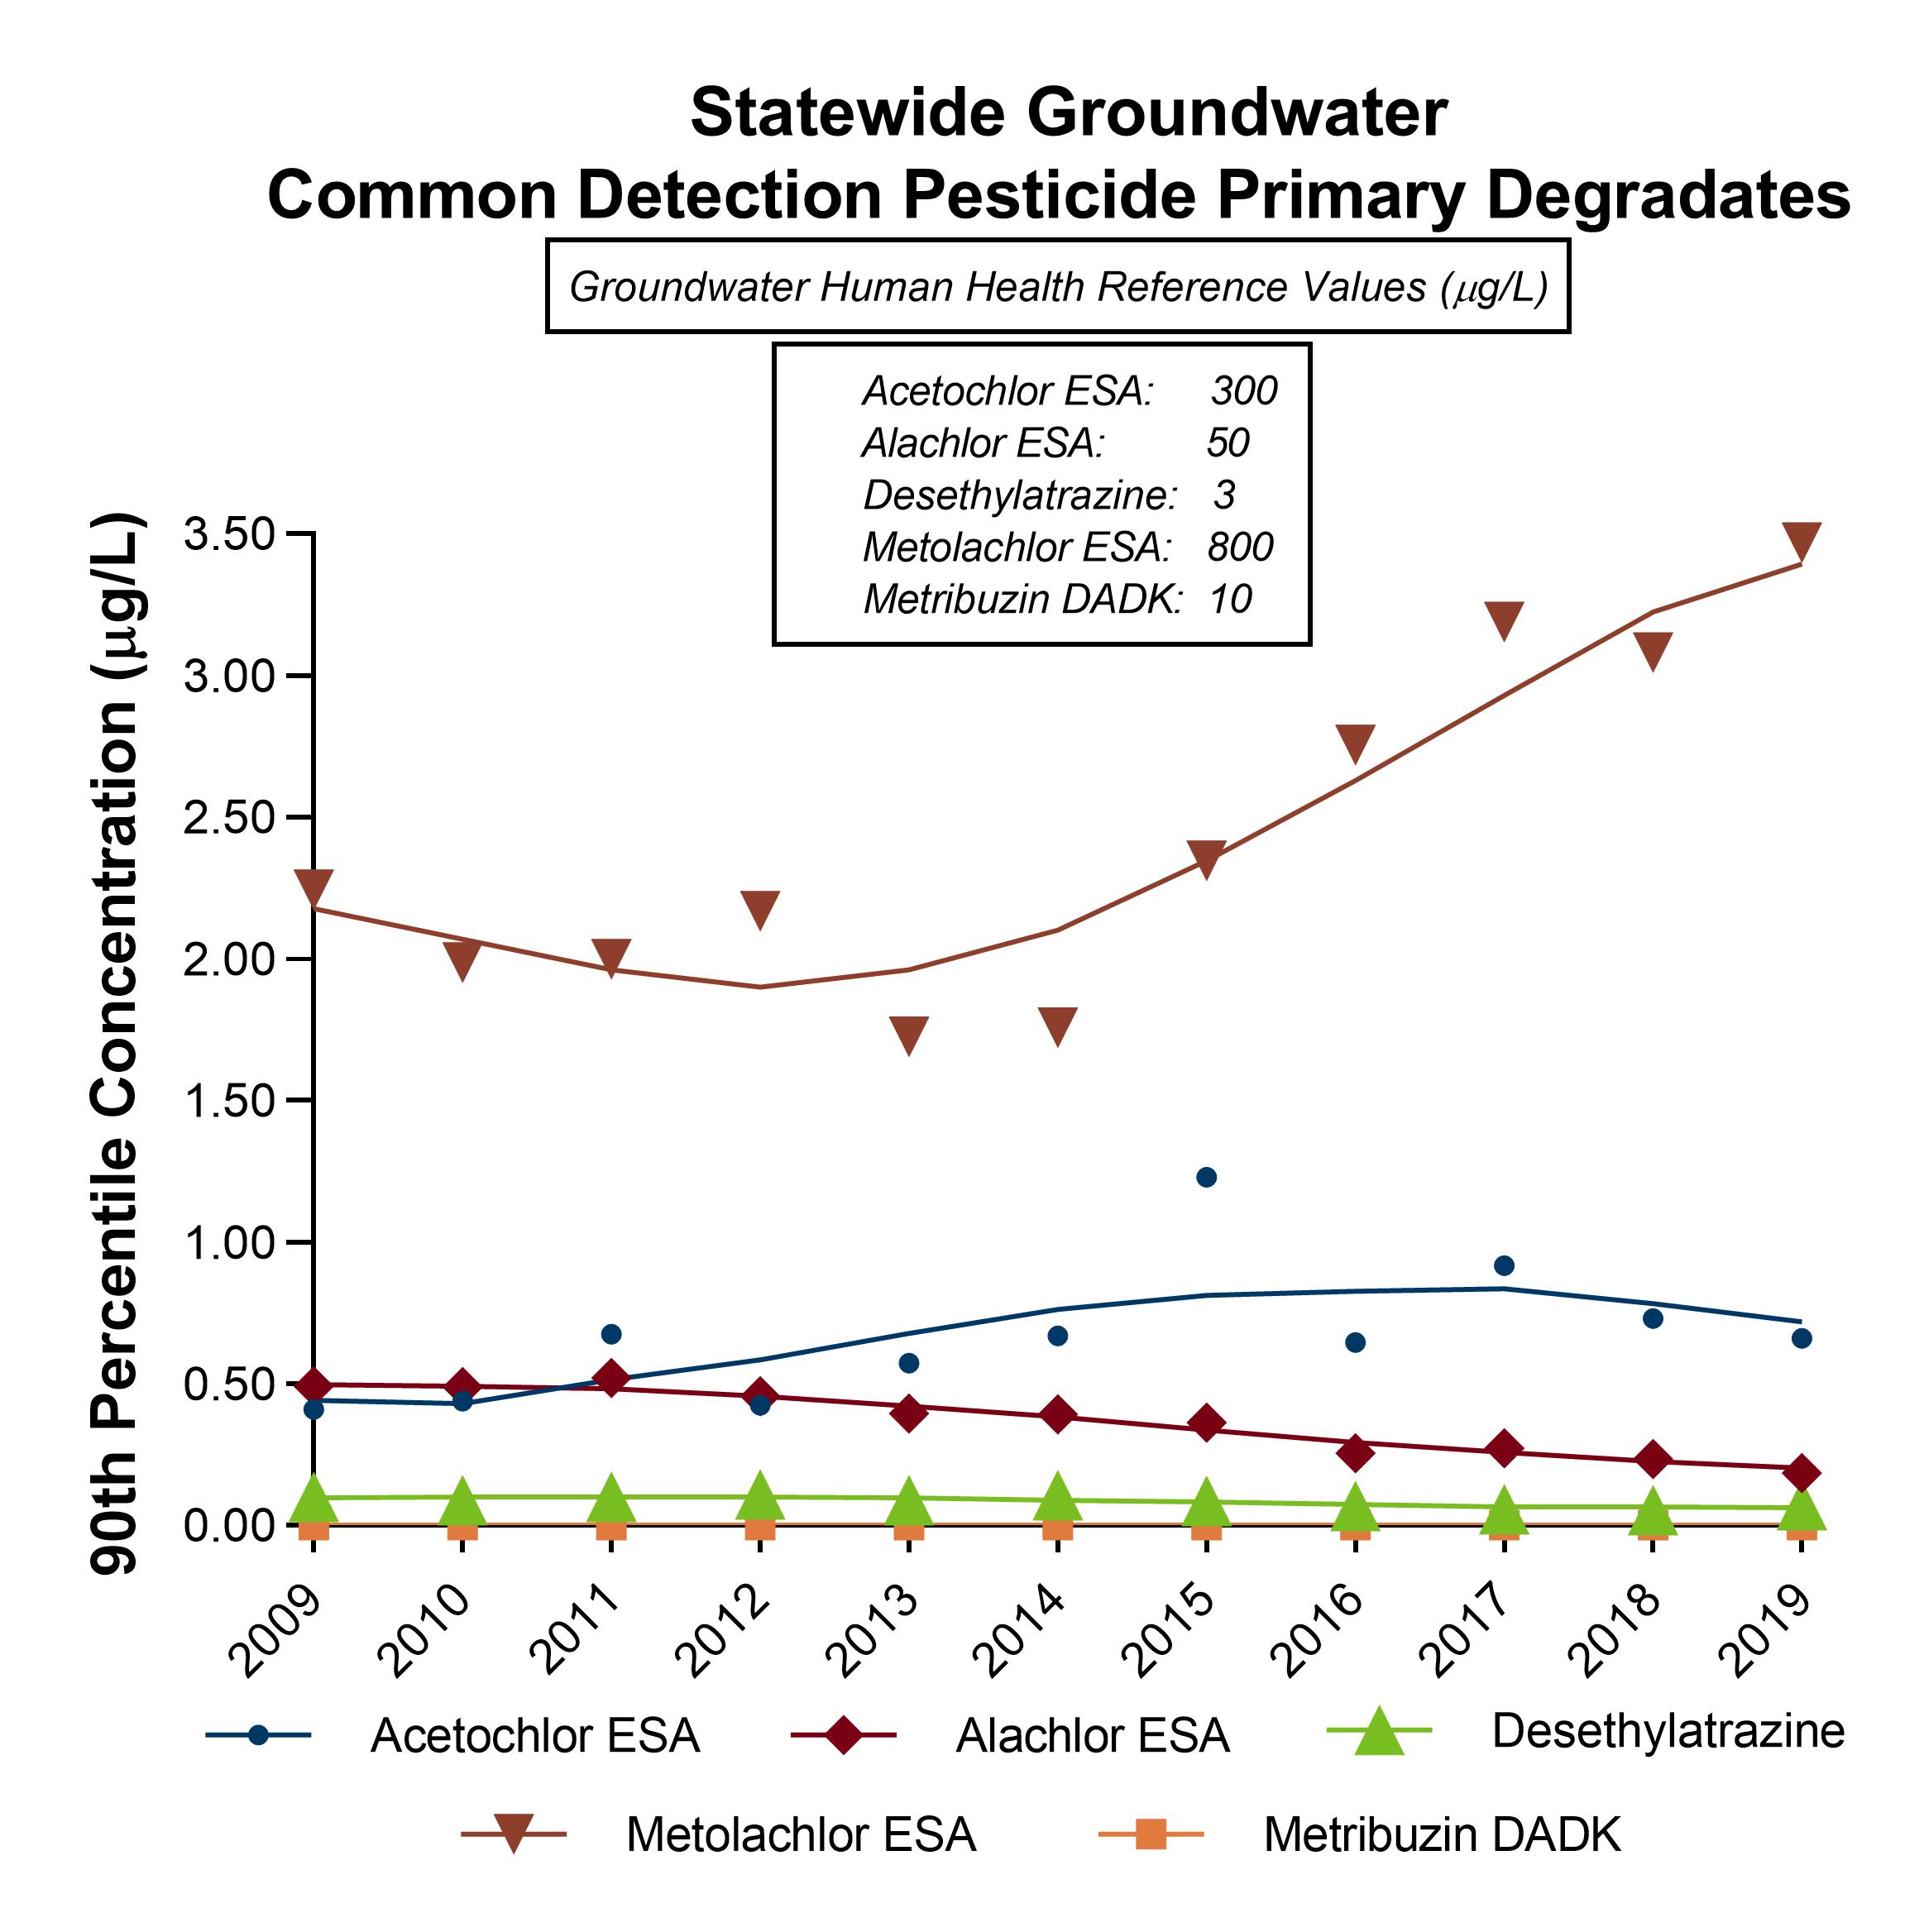 Statewide groundwater monitoring 2010 - 2019 time series. 90th percentile concentration (ng/L) is plotted by year. Metolachlor ESA concentrations are the highest, and have the largest increase from 2013 to 2019. Acetochlor ESA has slight increase from 2010-2017, and slight decrease from 2017-2019. Alachlor ESA has a steady decrease from 2009-2019. Metribuzin DADK and Desethylatrazine appear to be relatively flat, all values below 0.25.